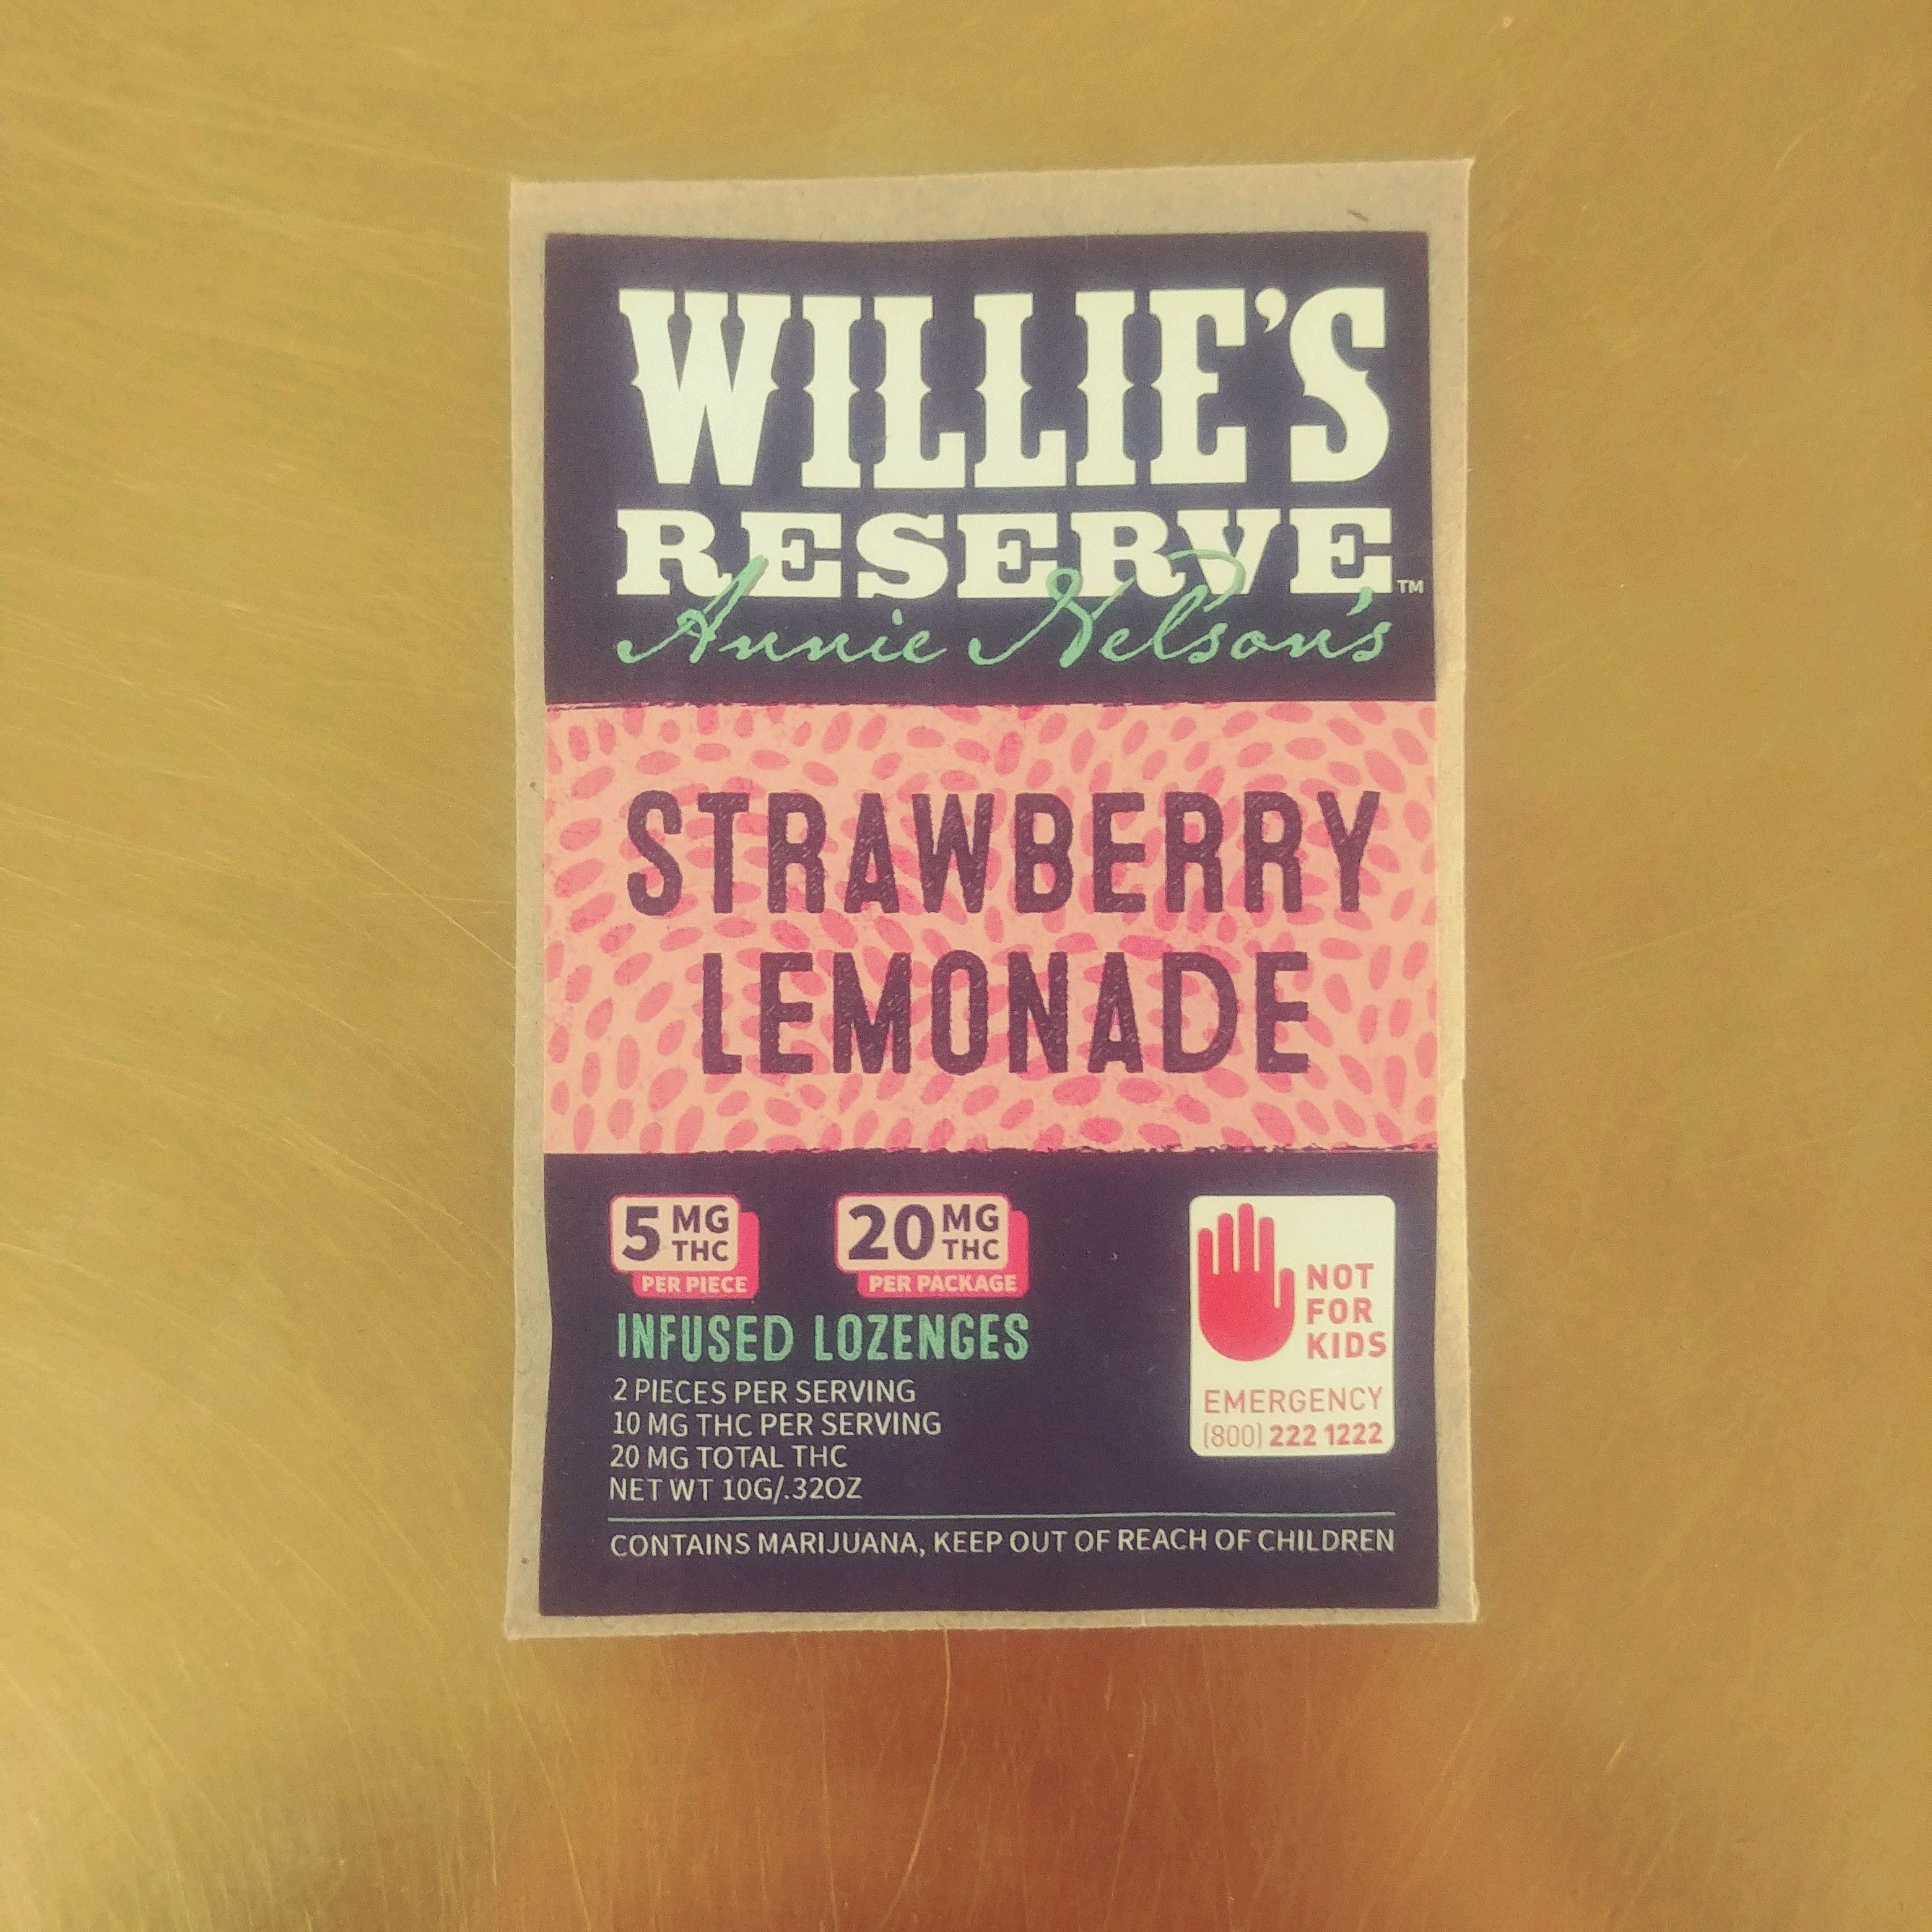 Strawberry Lemonade Hard Candies 5mg 4 Pack by Willie's Reserve